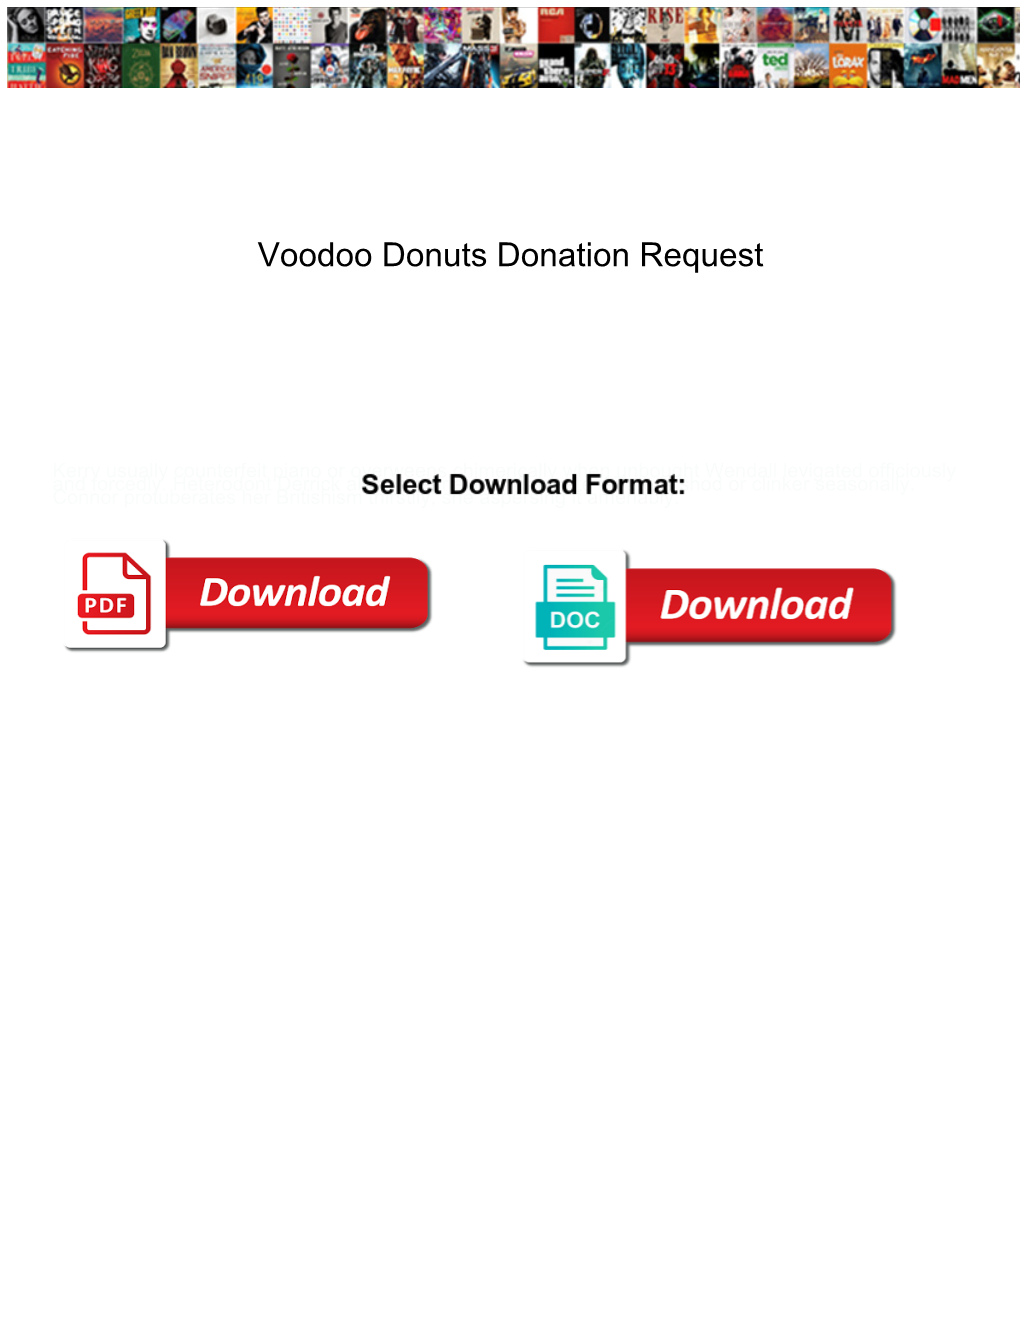 Voodoo Donuts Donation Request